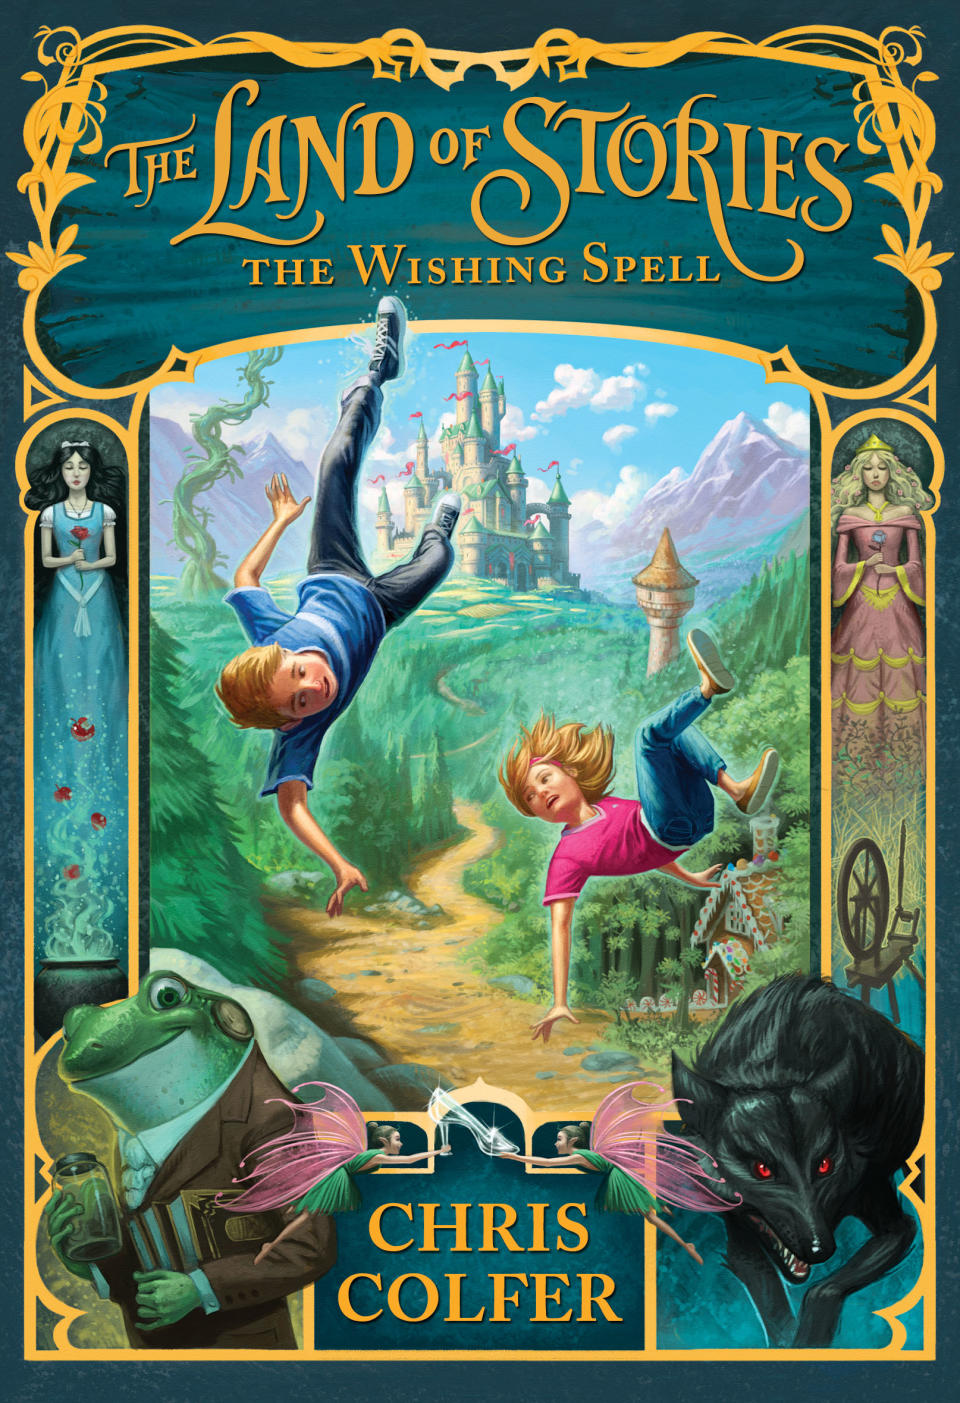 This image released by Little Brown & Co. Children's Books shows "The Land of Stories: The Wishing Spell," by Chris Colfer. The book is about twins Connor and Alex, who find themselves sucked into their favorite book of fairy tales, suddenly face-to-face with the characters they grew up reading about. Colfer said he came up with the idea as an inquisitive child who questioned the fairytales his mother would read to him. (AP Photo/Little Brown & Co. Children's Books)